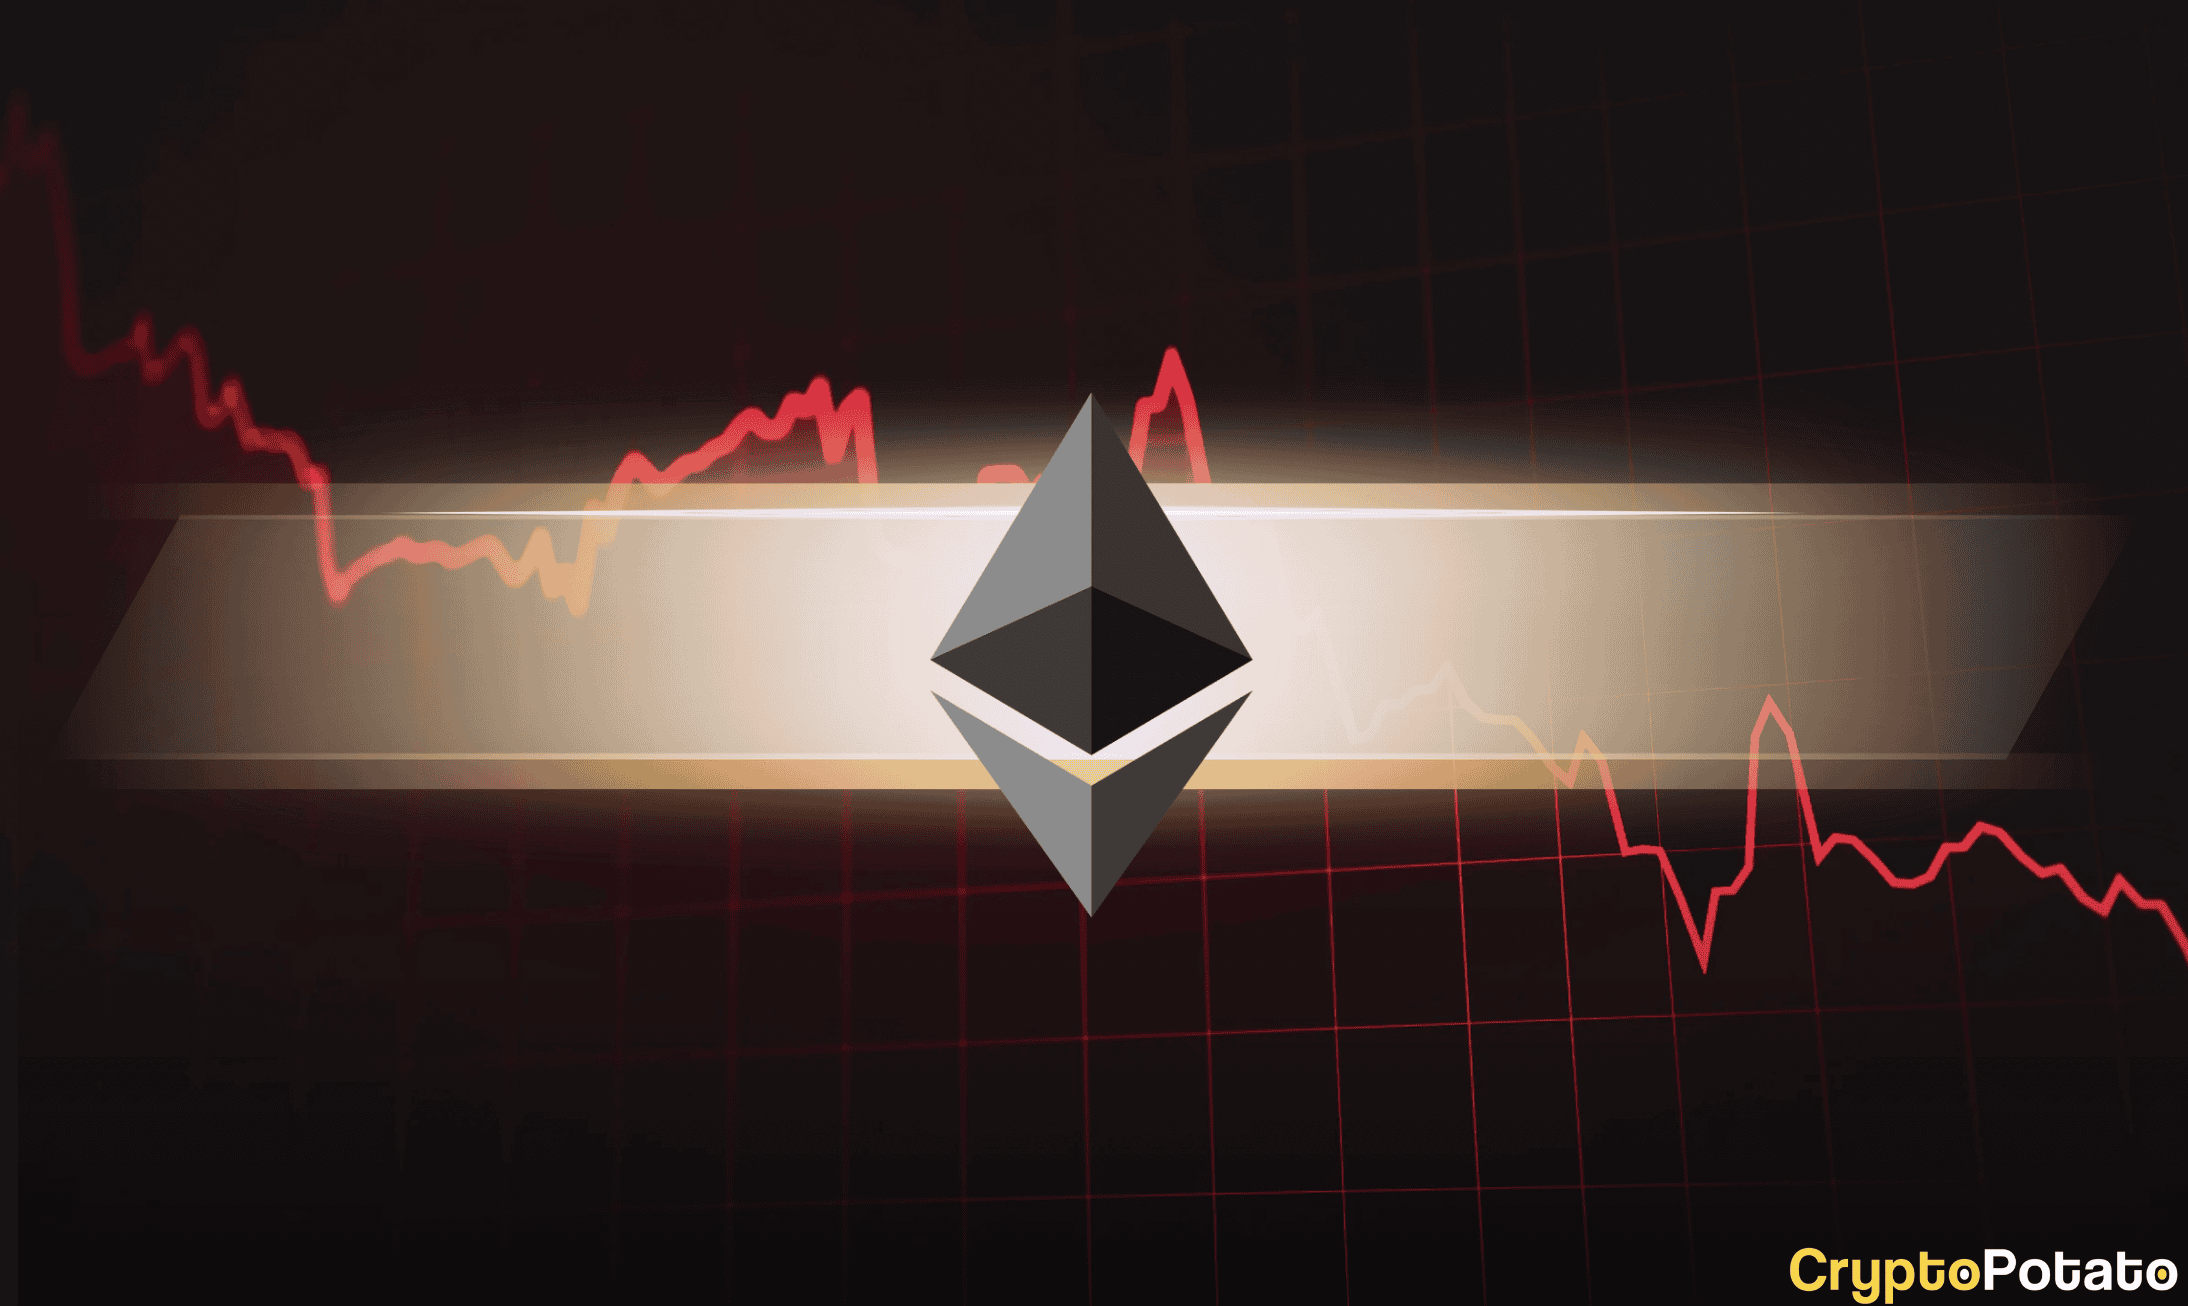 Incoming Ethereum Price Crash: Analyst Flags Warnings of Spot ETH ETF Launch